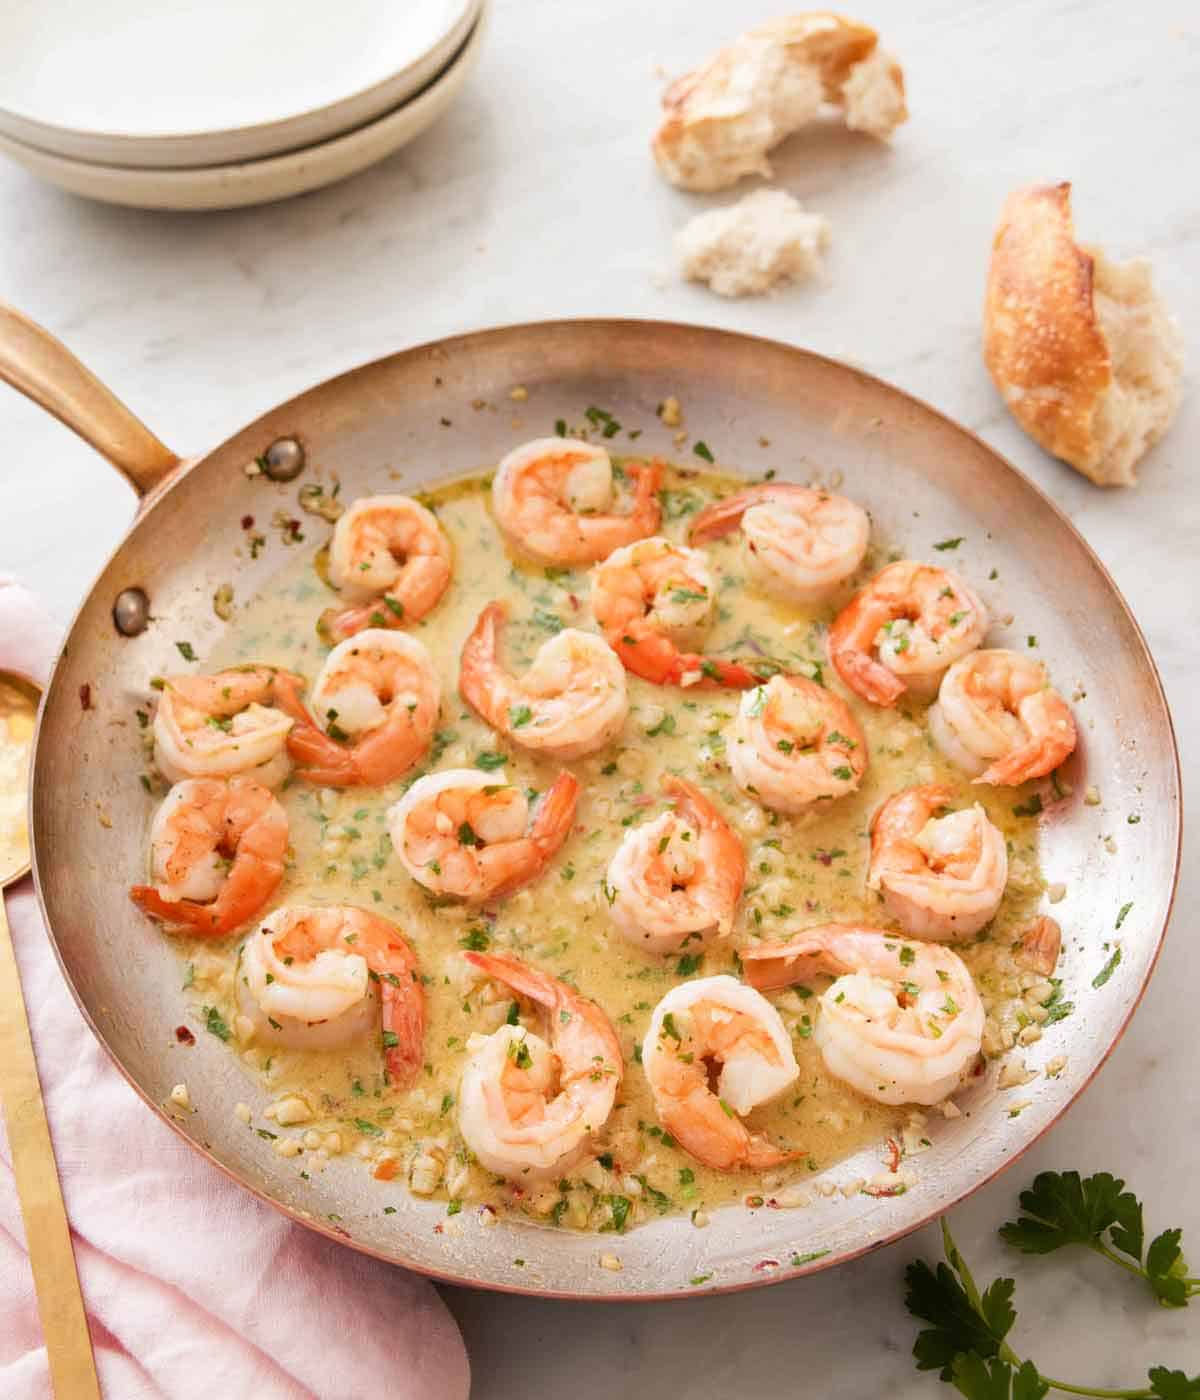 A skillet holding shrimp scampi with some torn bread in the background with some plates.